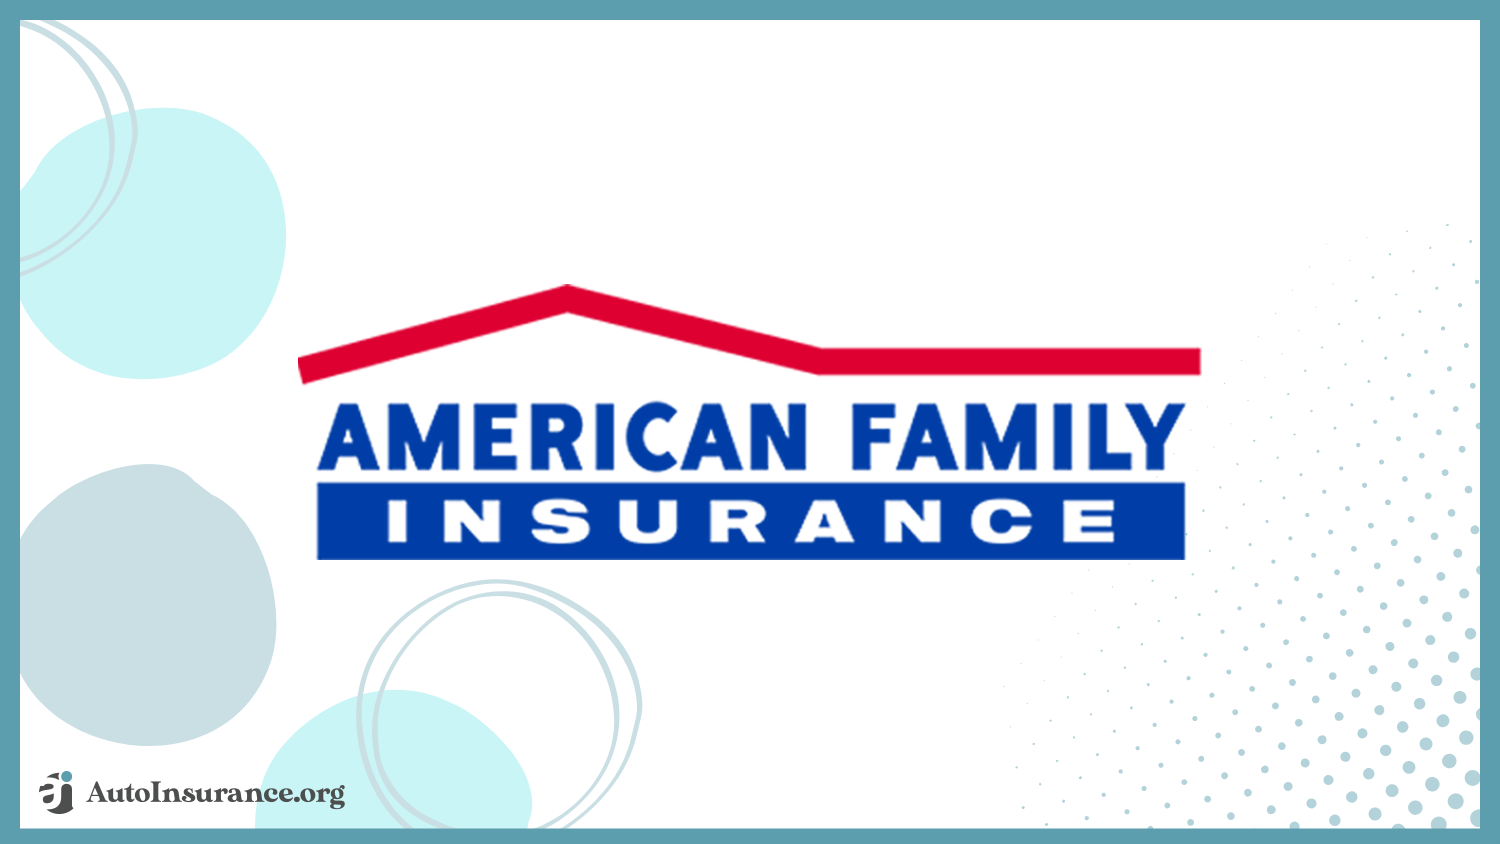 American Family: Best Auto Insurance for Drivers Under 25